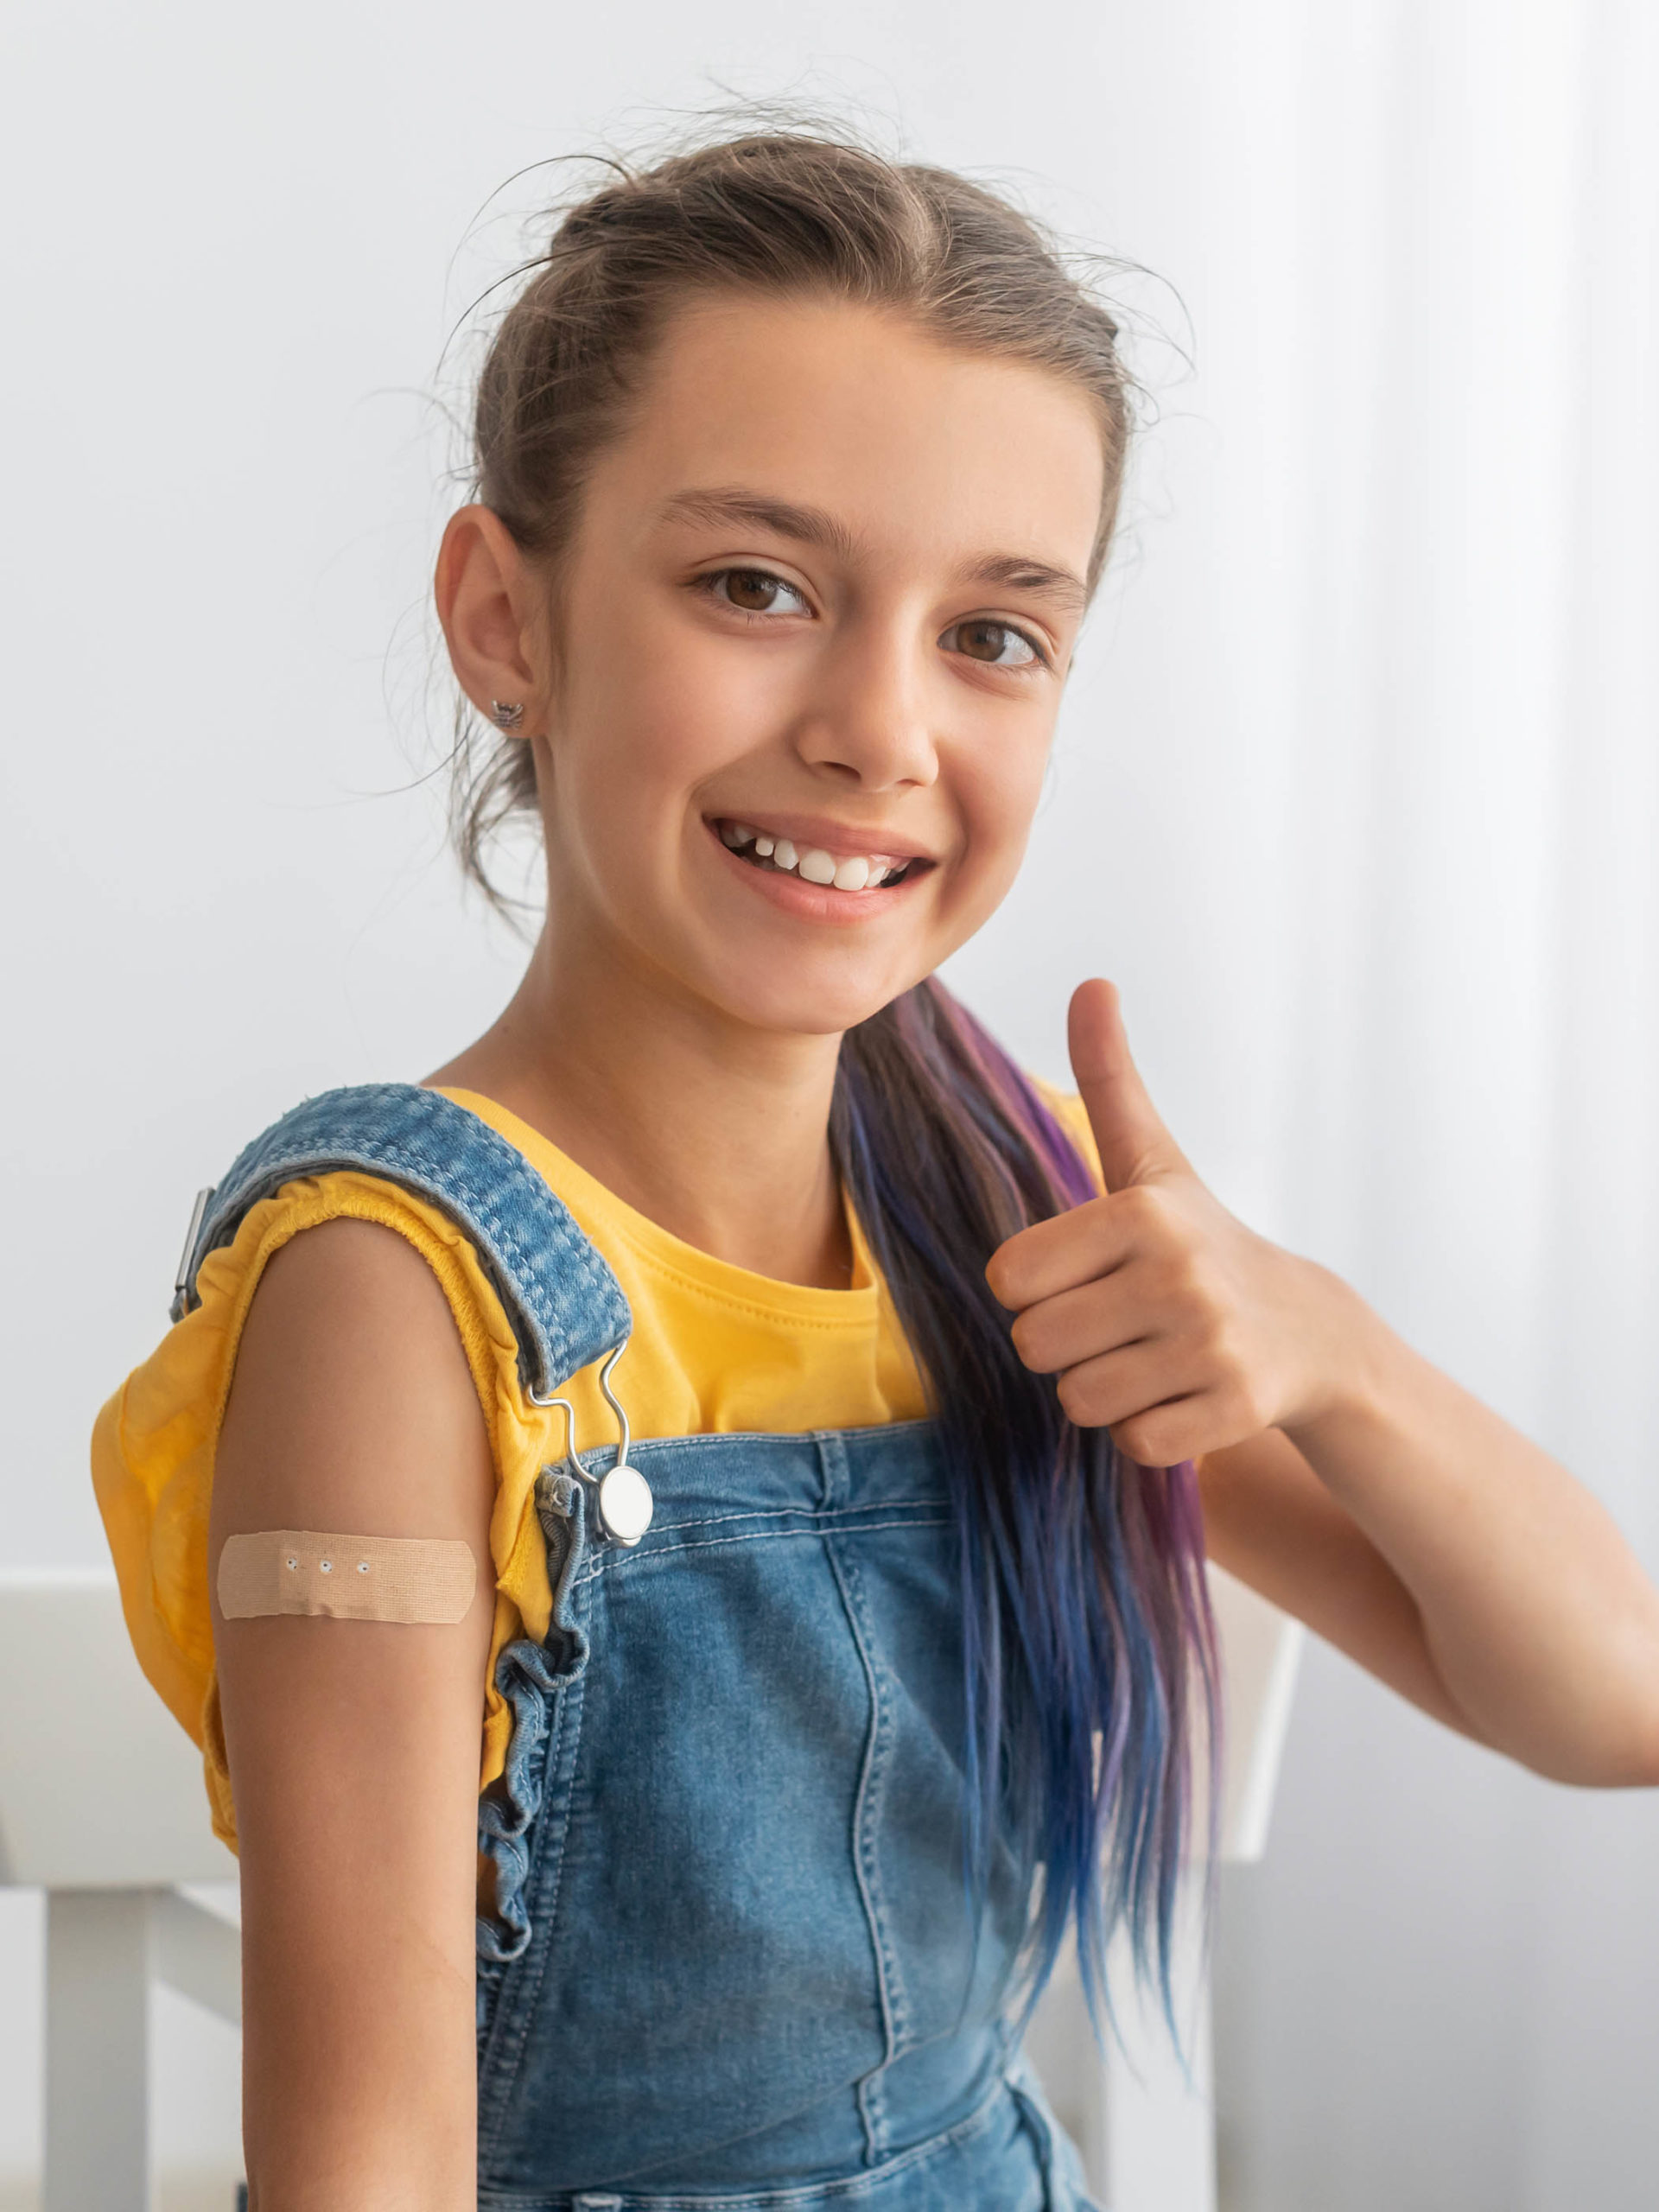 preteen girl wearing a bandage on her arm giving a thumbs up